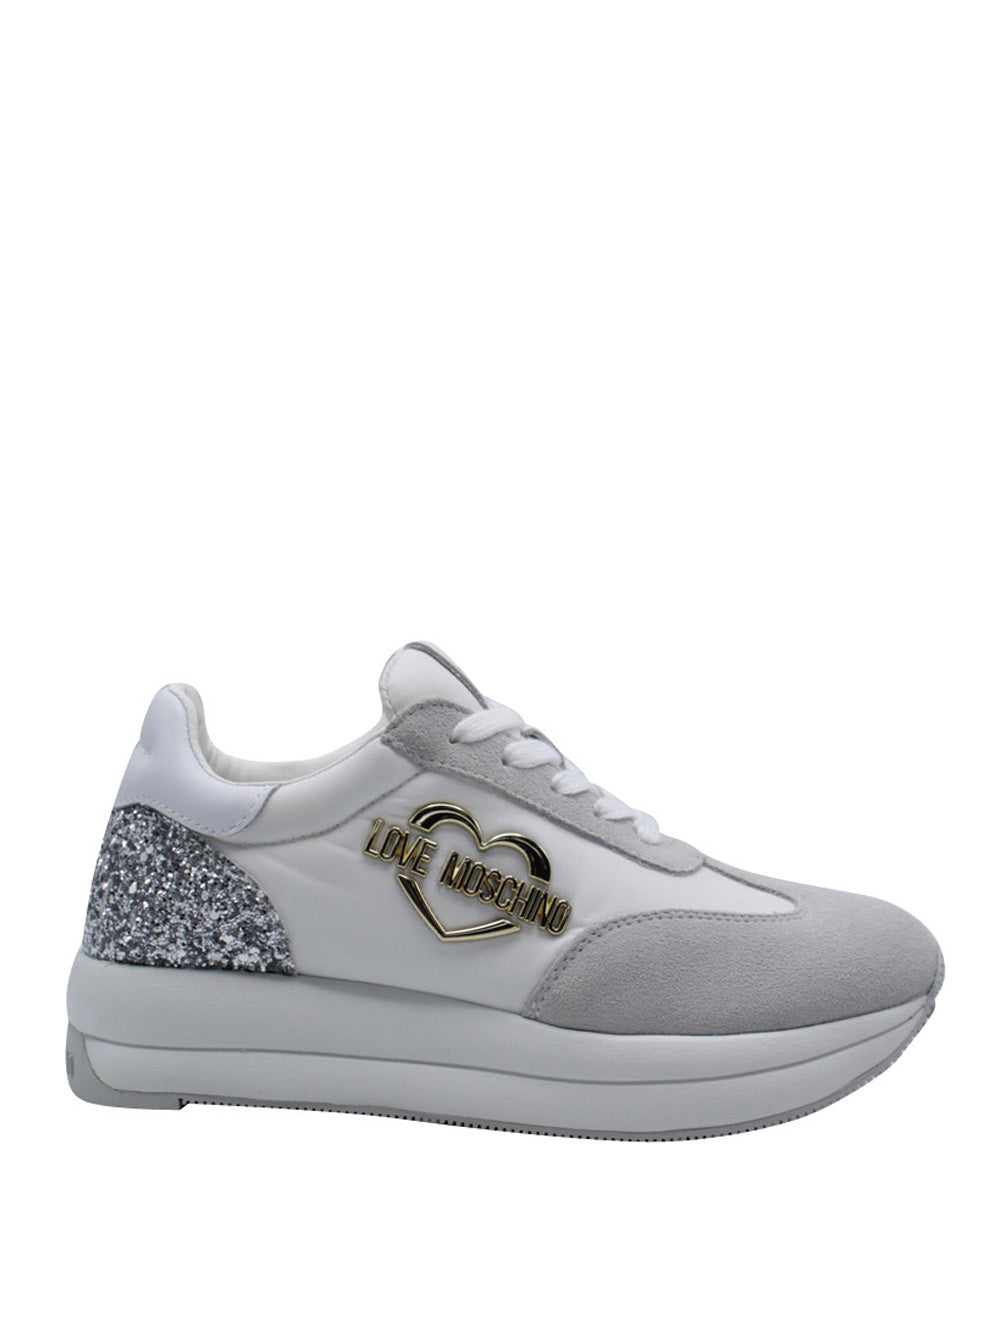 MOSCHINO Sneakers Donna - Bianco